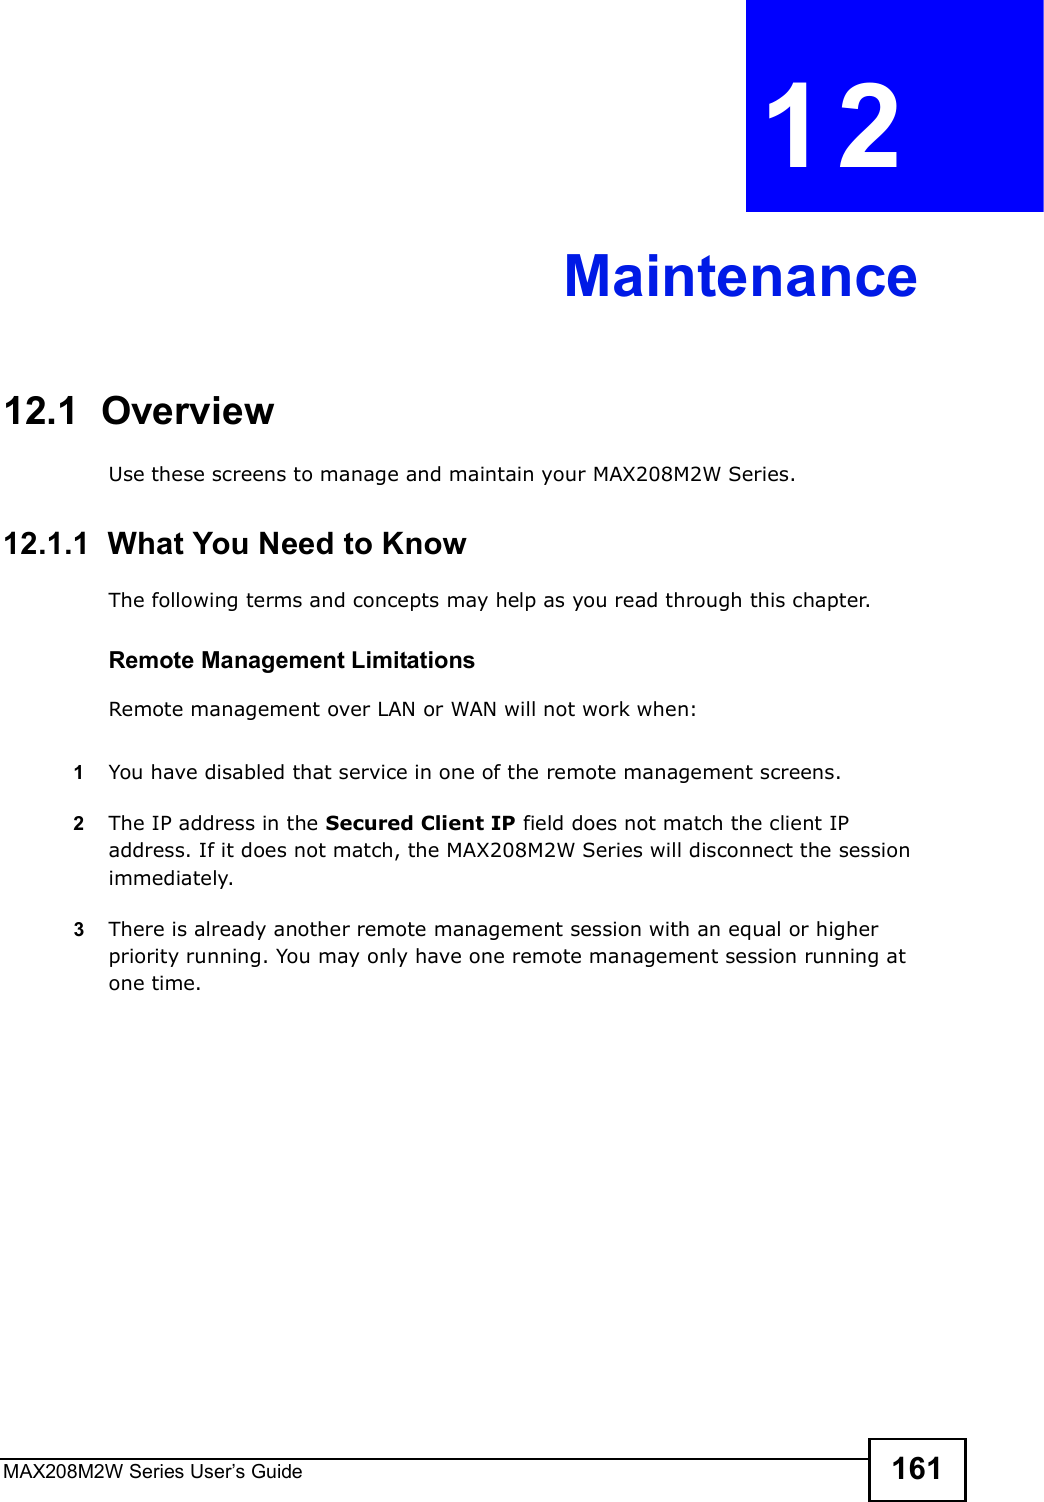 MAX208M2W Series User s Guide 161CHAPTER  12 Maintenance12.1  OverviewUse these screens to manage and maintain your MAX208M2W Series.12.1.1  What You Need to KnowThe following terms and concepts may help as you read through this chapter.Remote Management LimitationsRemote management over LAN or WAN will not work when:1You have disabled that service in one of the remote management screens.2The IP address in the Secured Client IP field does not match the client IP address. If it does not match, the MAX208M2W Series will disconnect the session immediately.3There is already another remote management session with an equal or higher priority running. You may only have one remote management session running at one time.